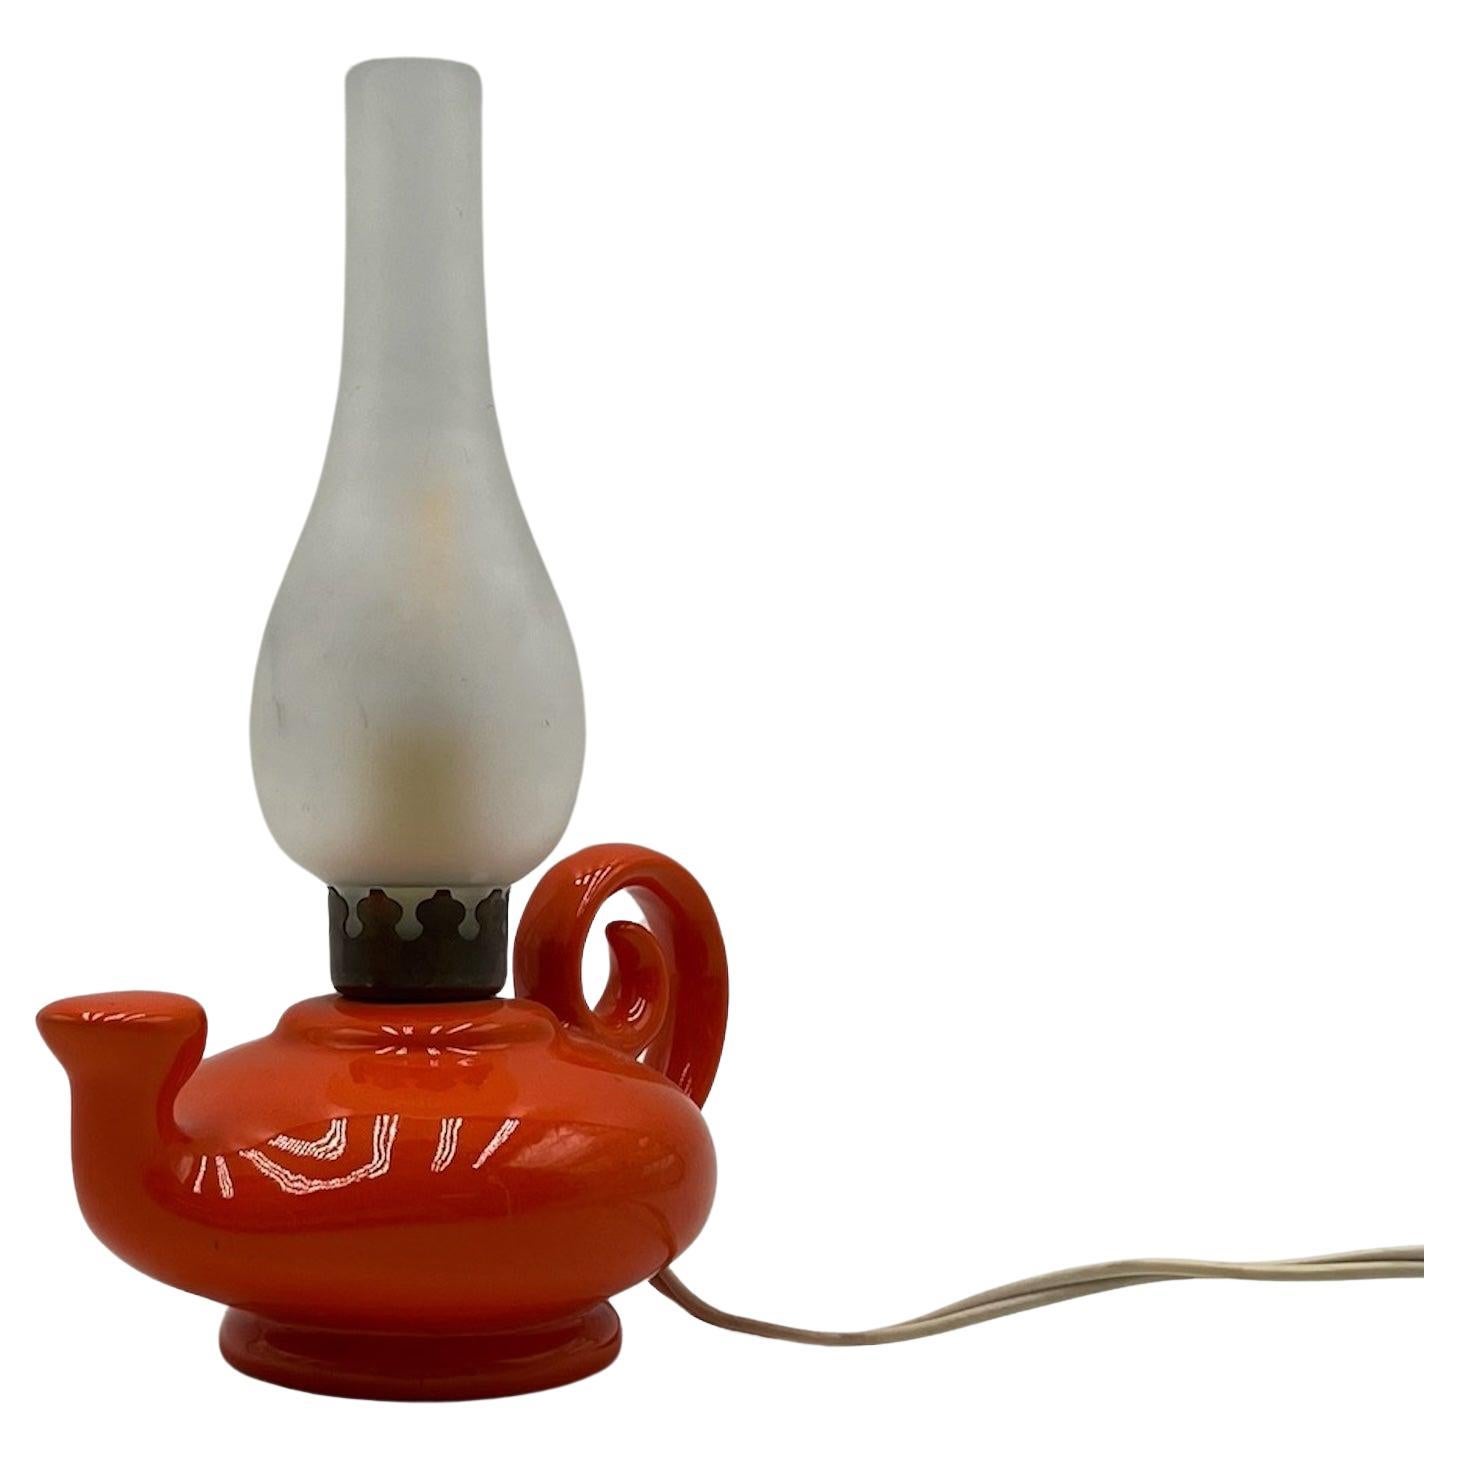 Vintage Orange Ceramic and Glass Lamp Made in Italy, 1960s For Sale